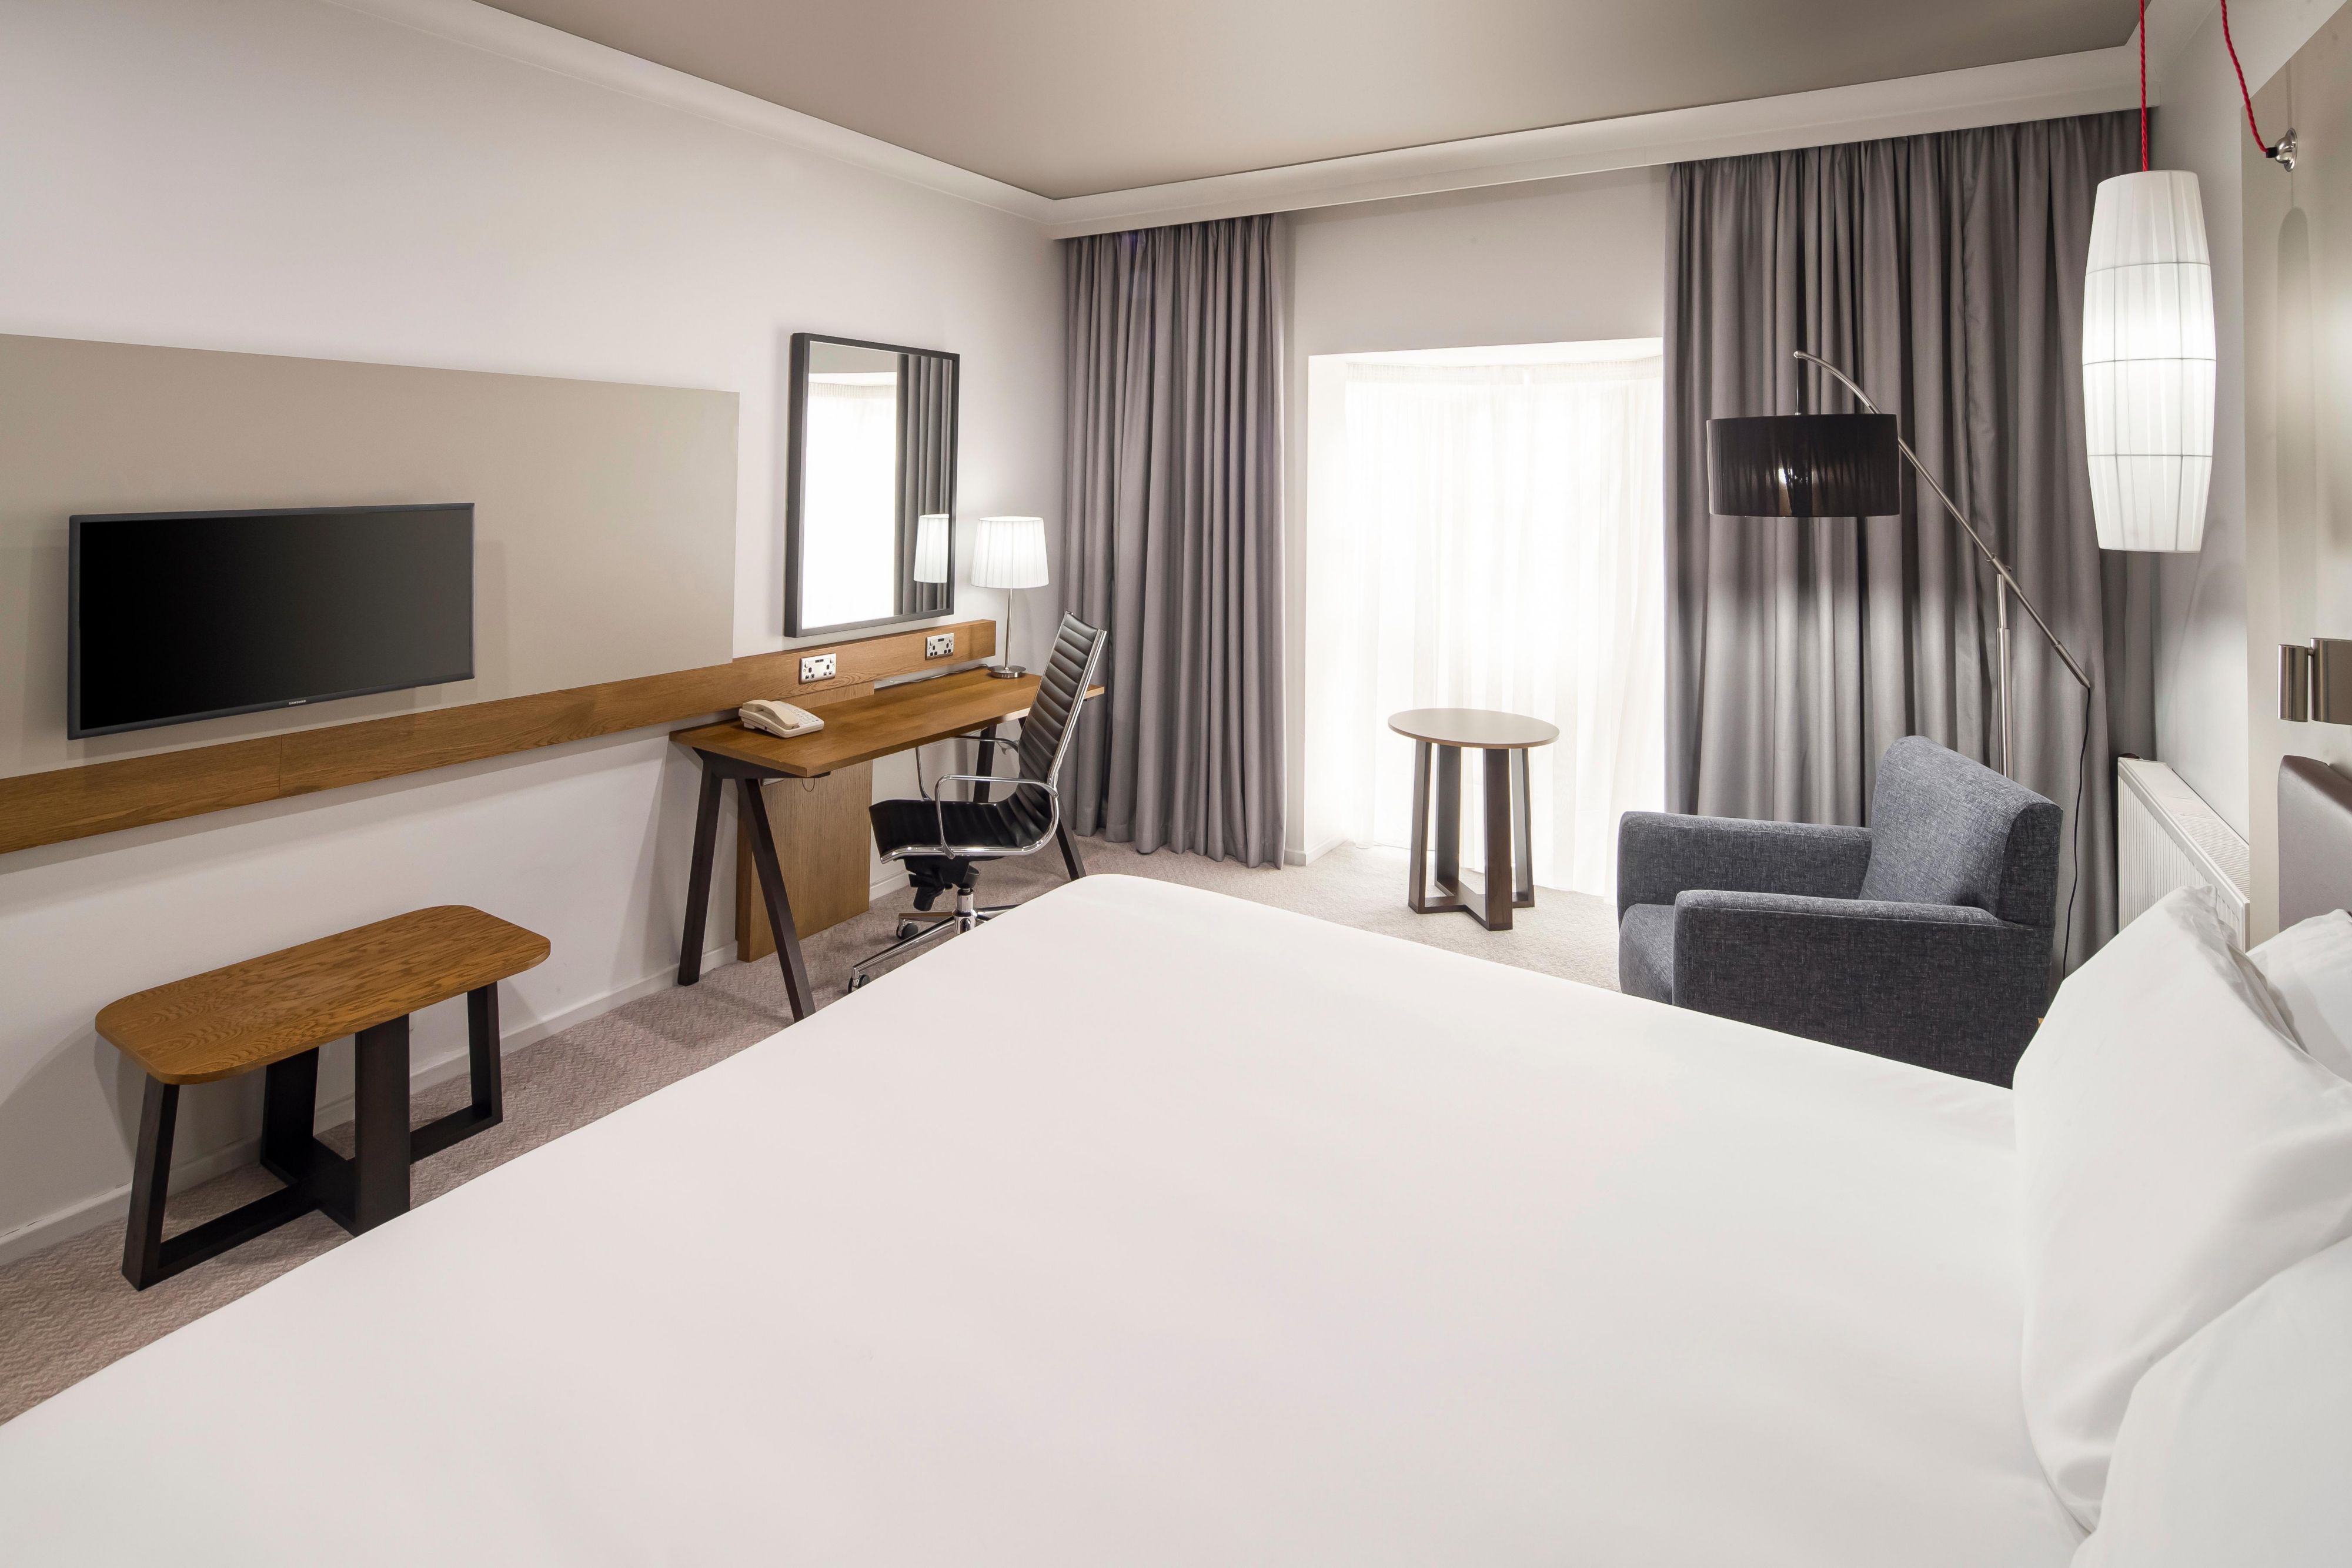 Enjoy your stay in our relaxing modern Executive bedroom.